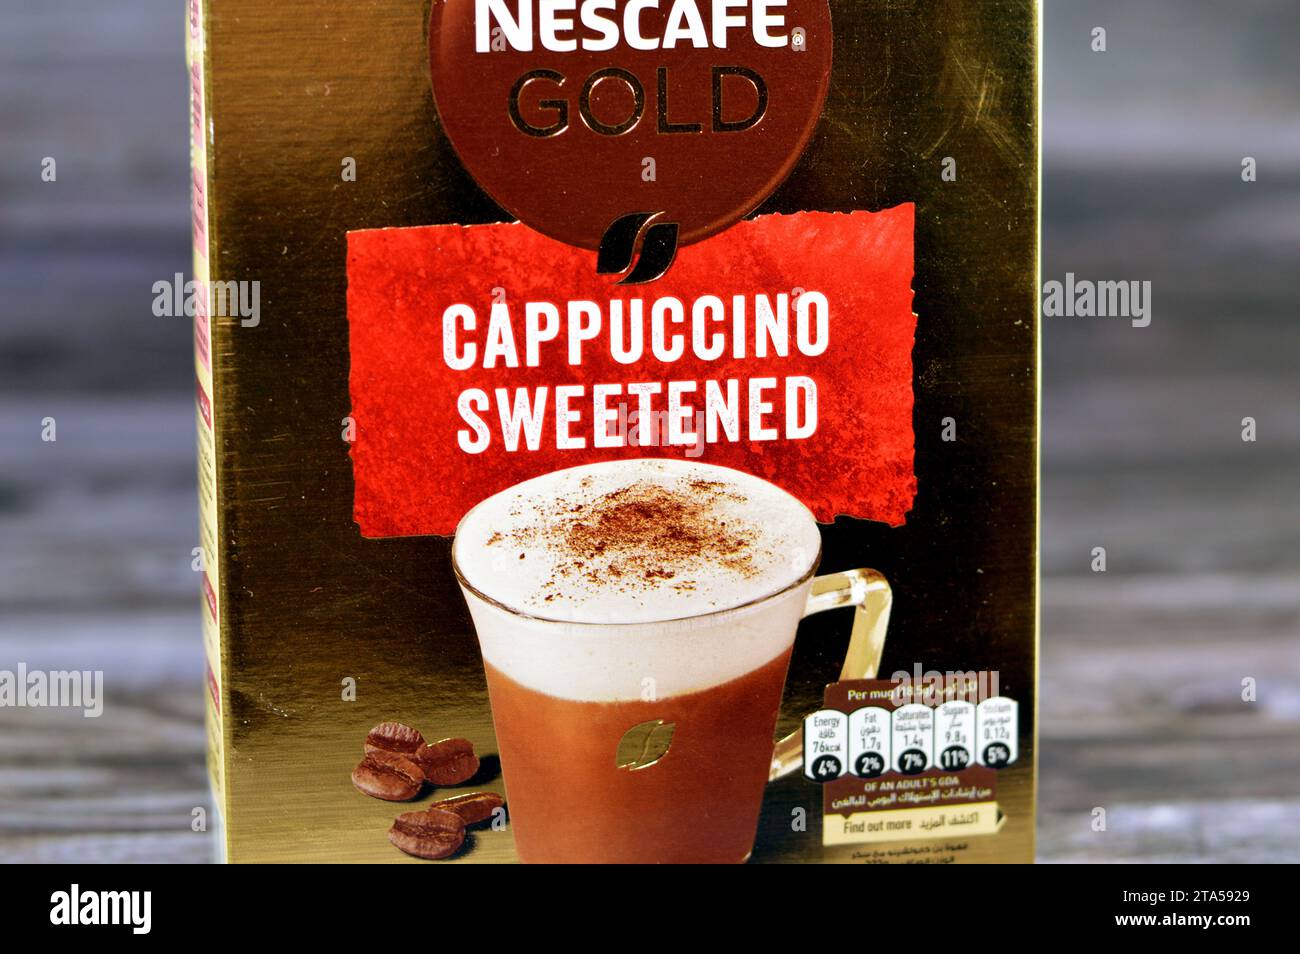 https://c8.alamy.com/comp/2TA5929/cairo-egypt-november-4-2023-nestle-nescafe-gold-cappuccino-caramel-new-recipe-complimented-with-a-velvety-milk-foam-to-bring-the-real-coffee-shop-2TA5929.jpg